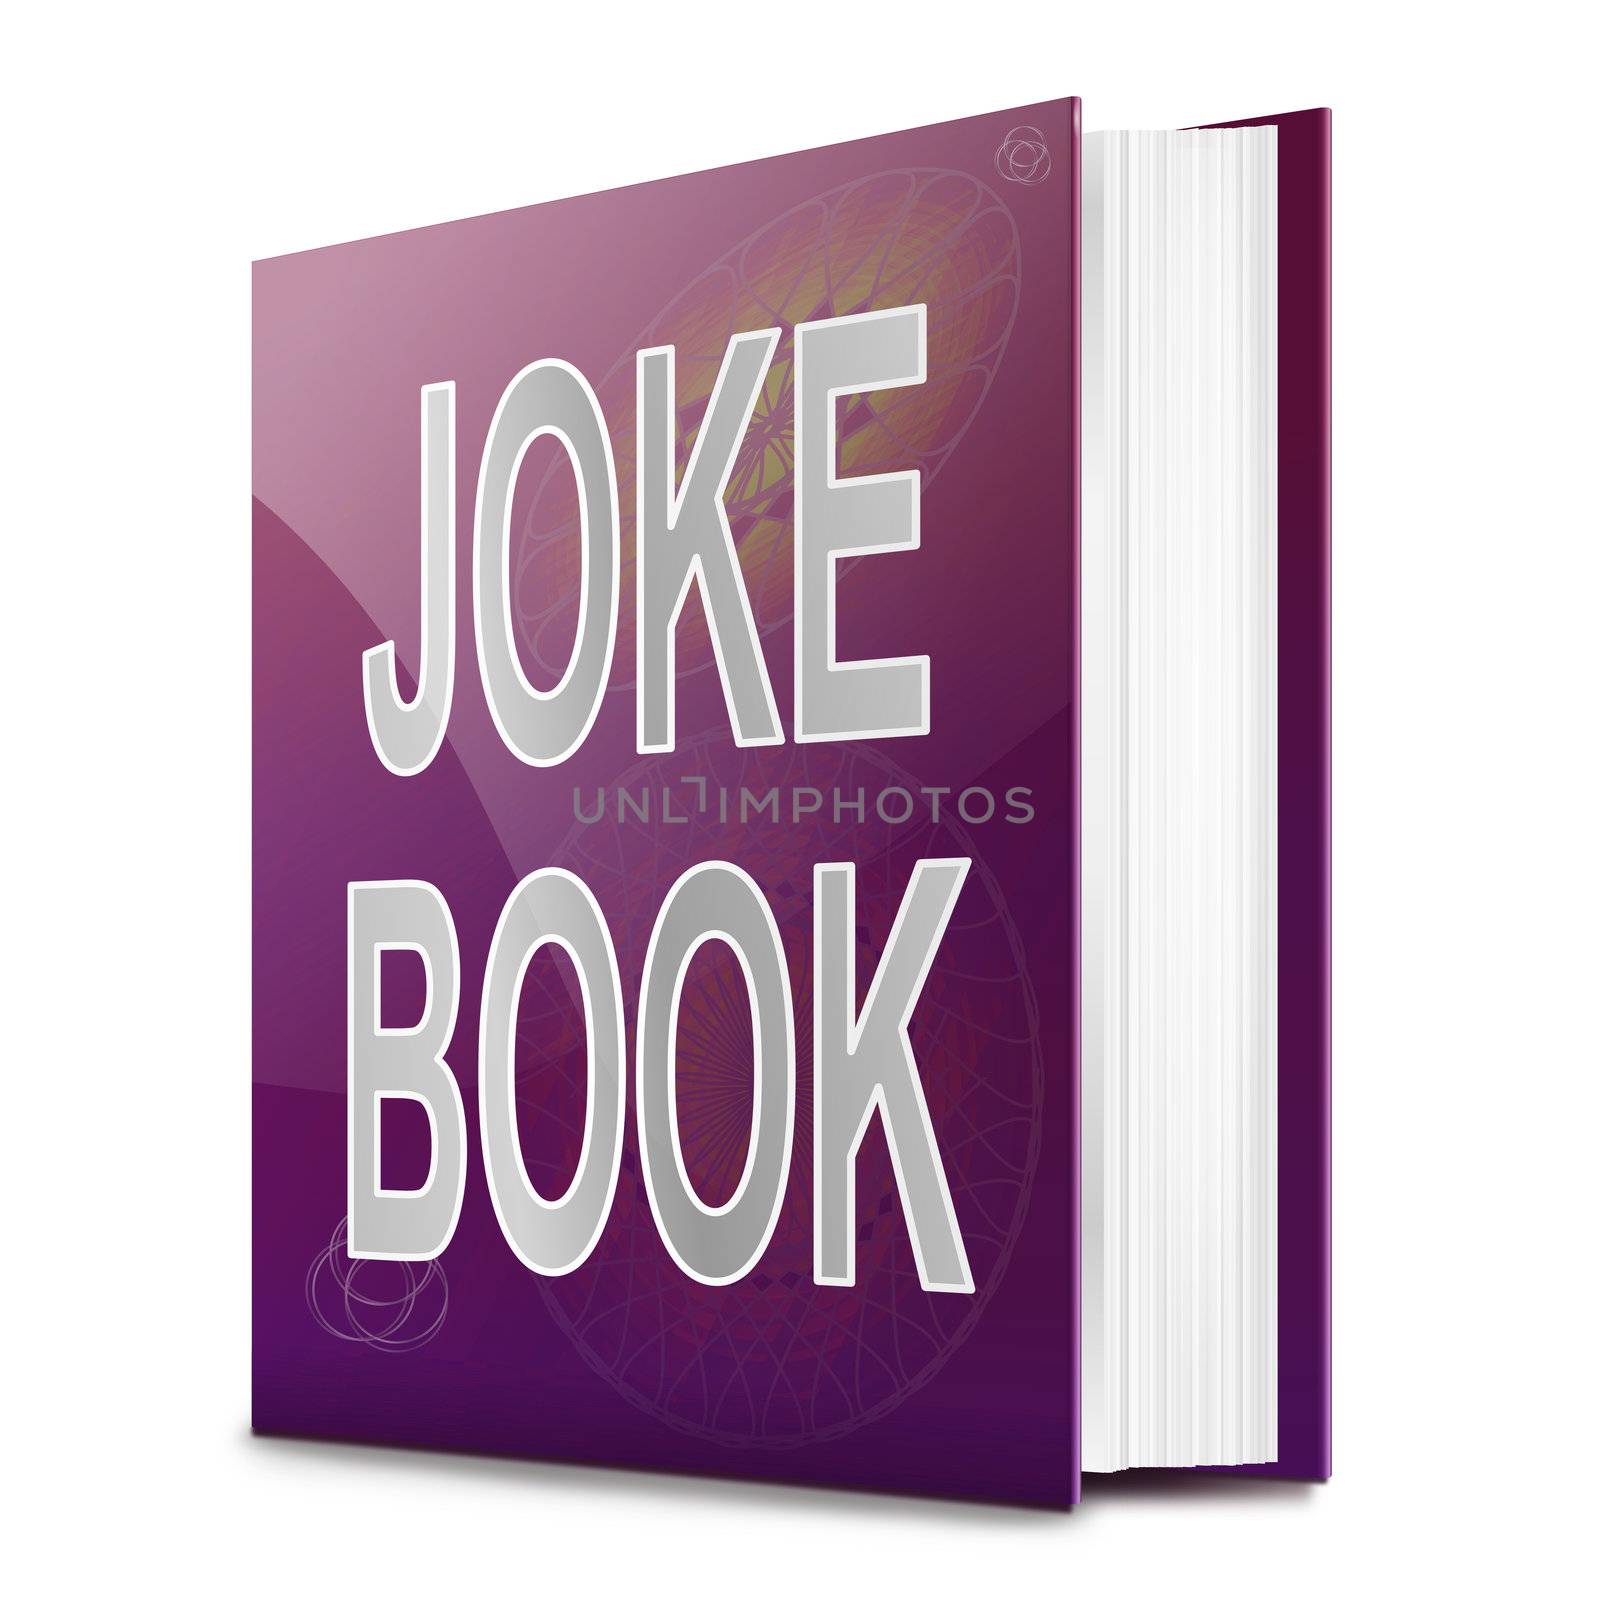 Illustration depicting a text book with a joke book title. White background.